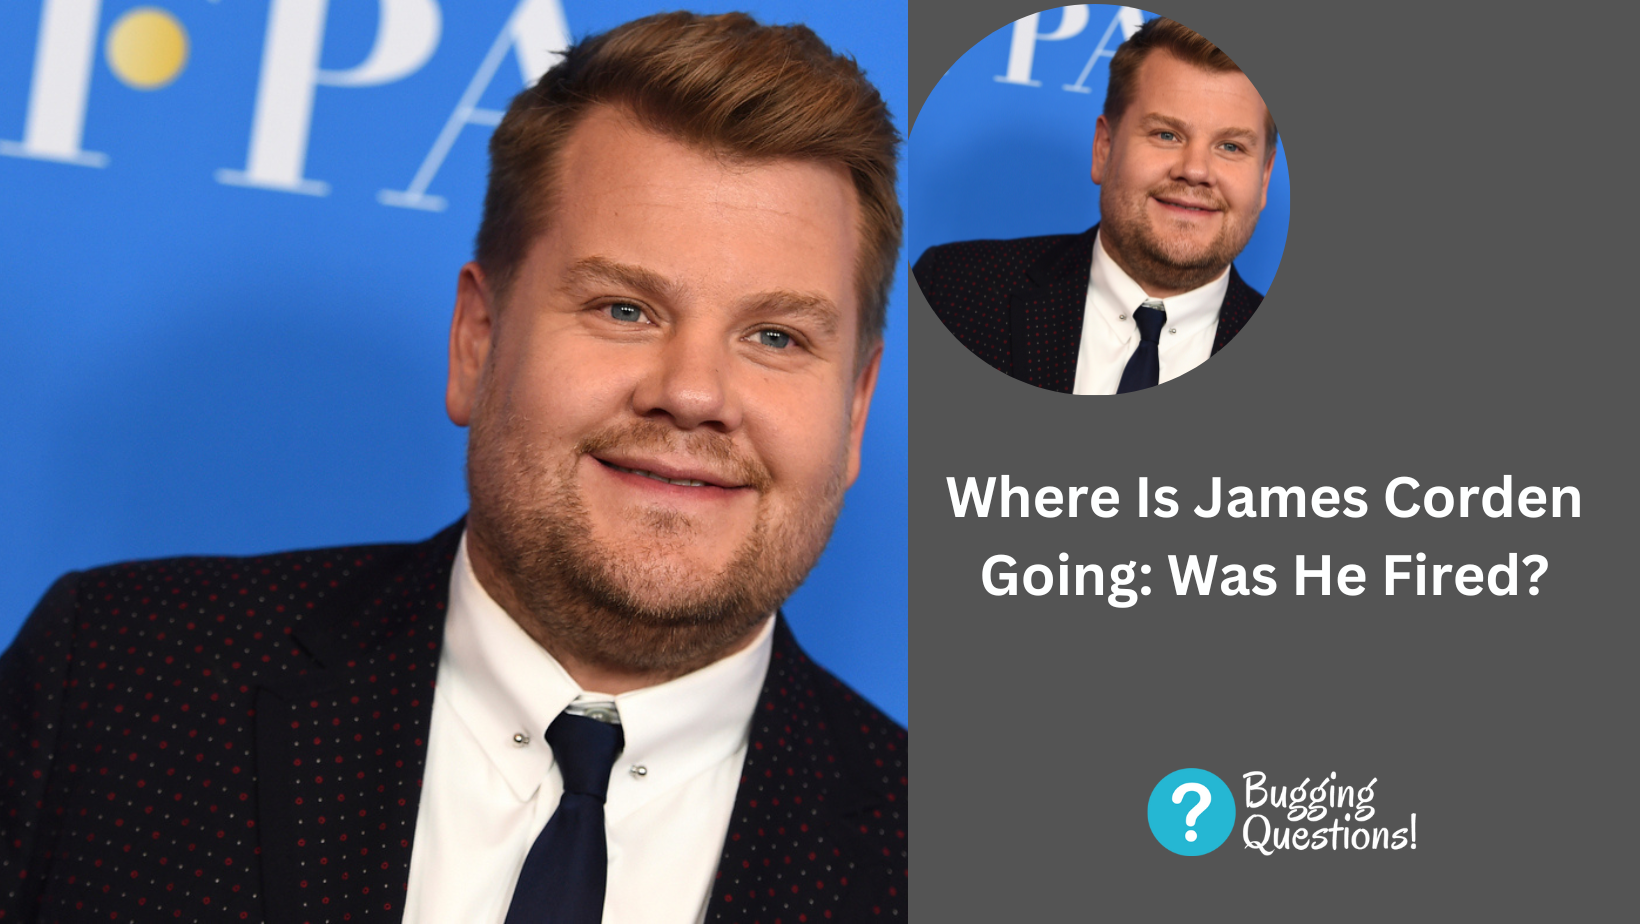 Where Is James Corden Going: Was He Fired?